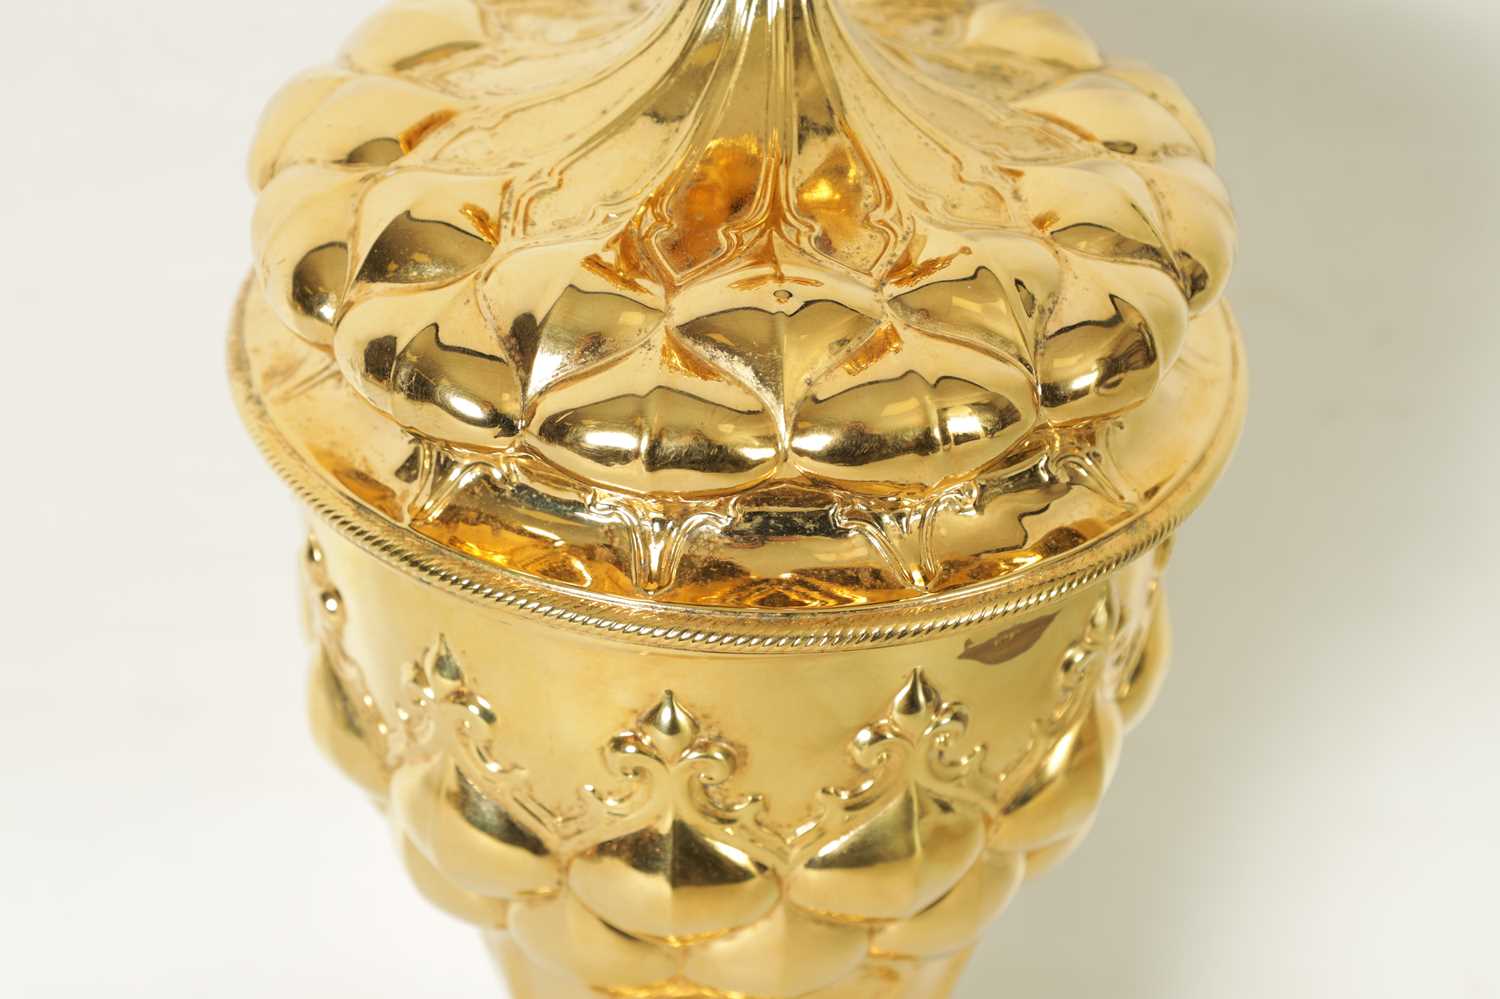 AN ART DECO GOTHIC REVIVAL CONTINENTAL SILVER GILT PRESENTATION CUP AND COVER - Image 3 of 10